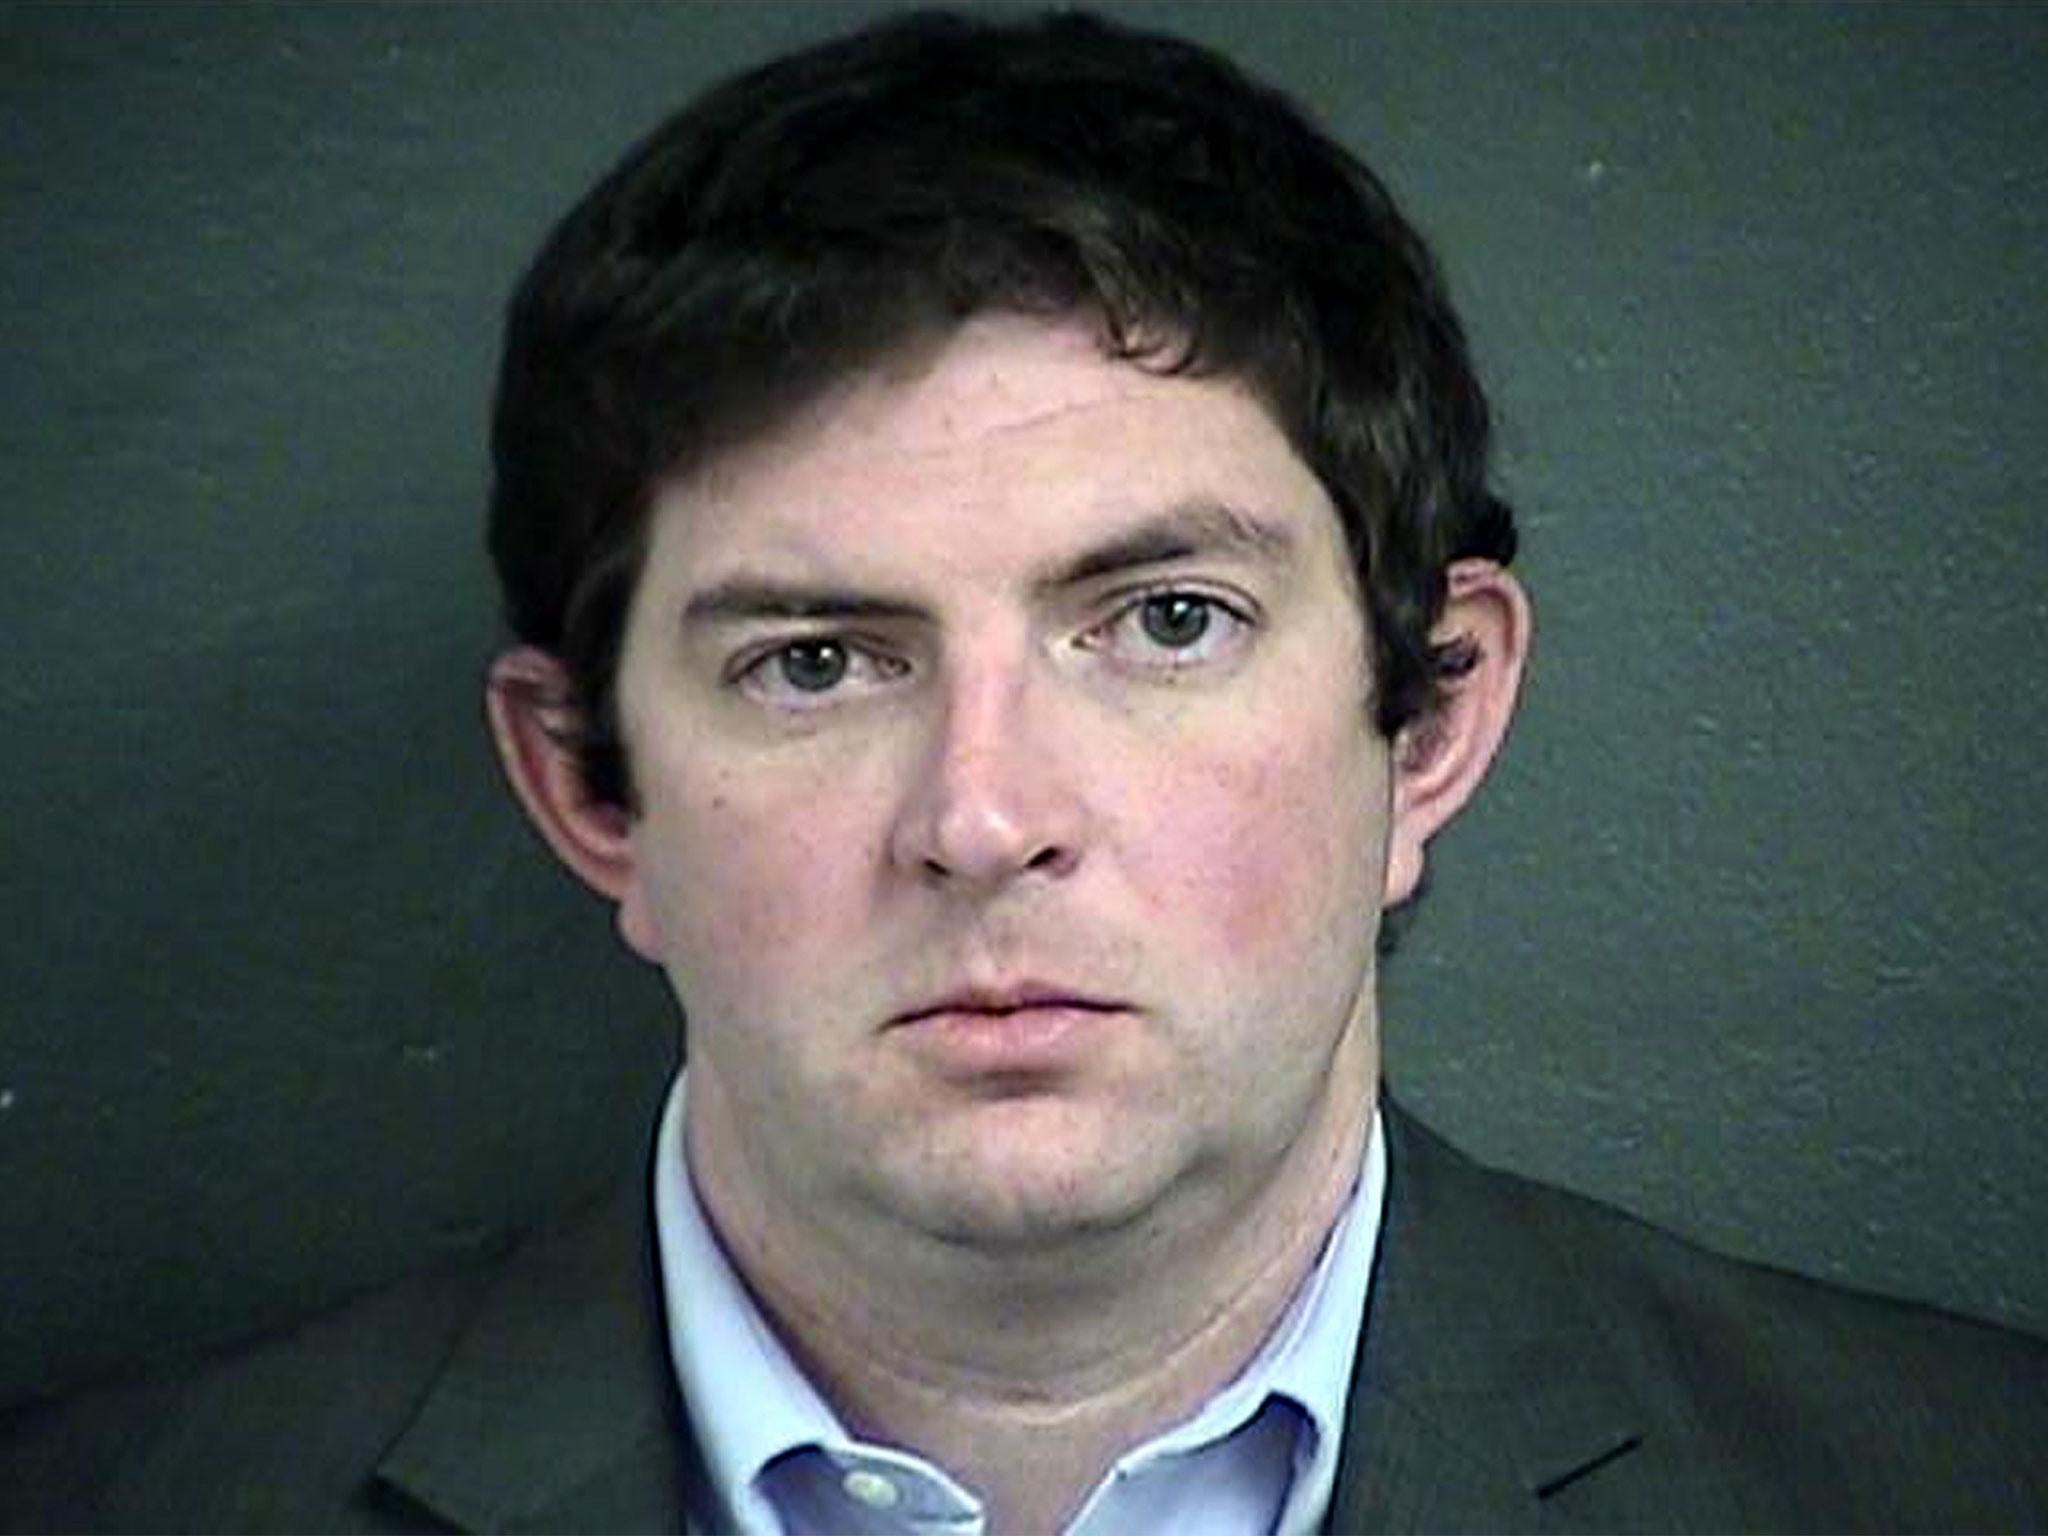 Ex-water park director Tyler Miles faces an involuntary manslaughter charge